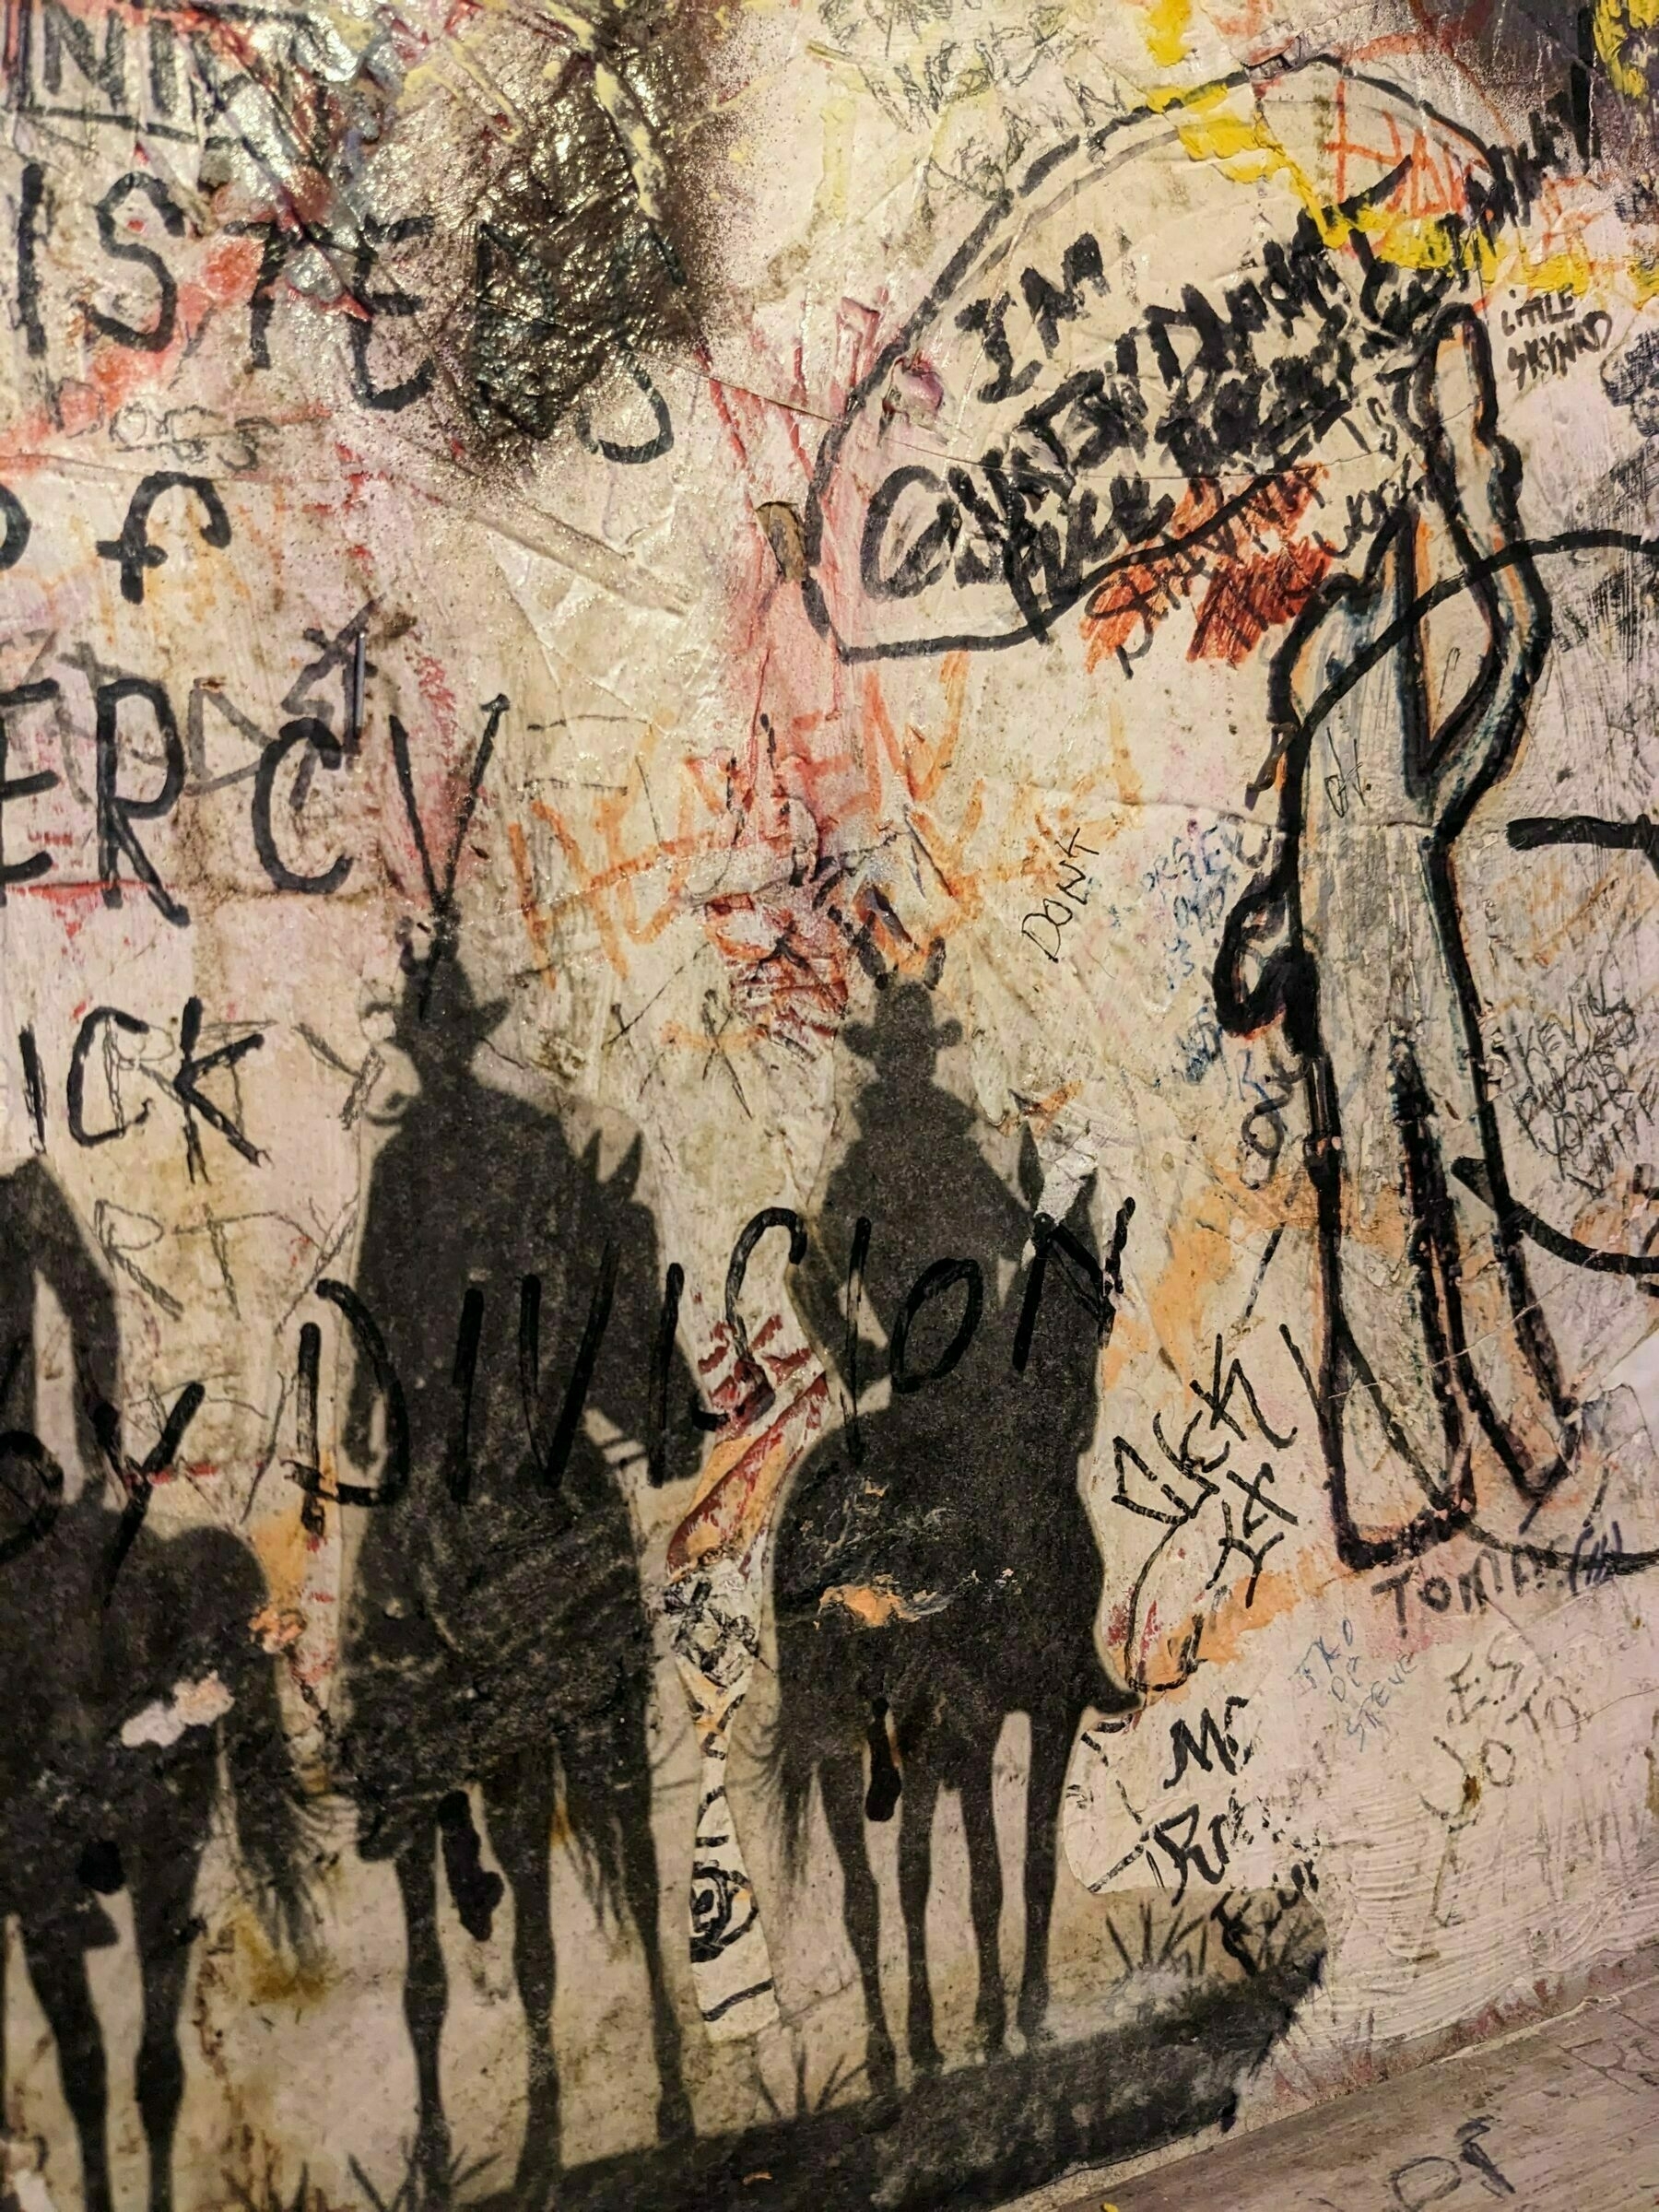 stenciled cowboys on horseback in silouhette painted on a restroom wall